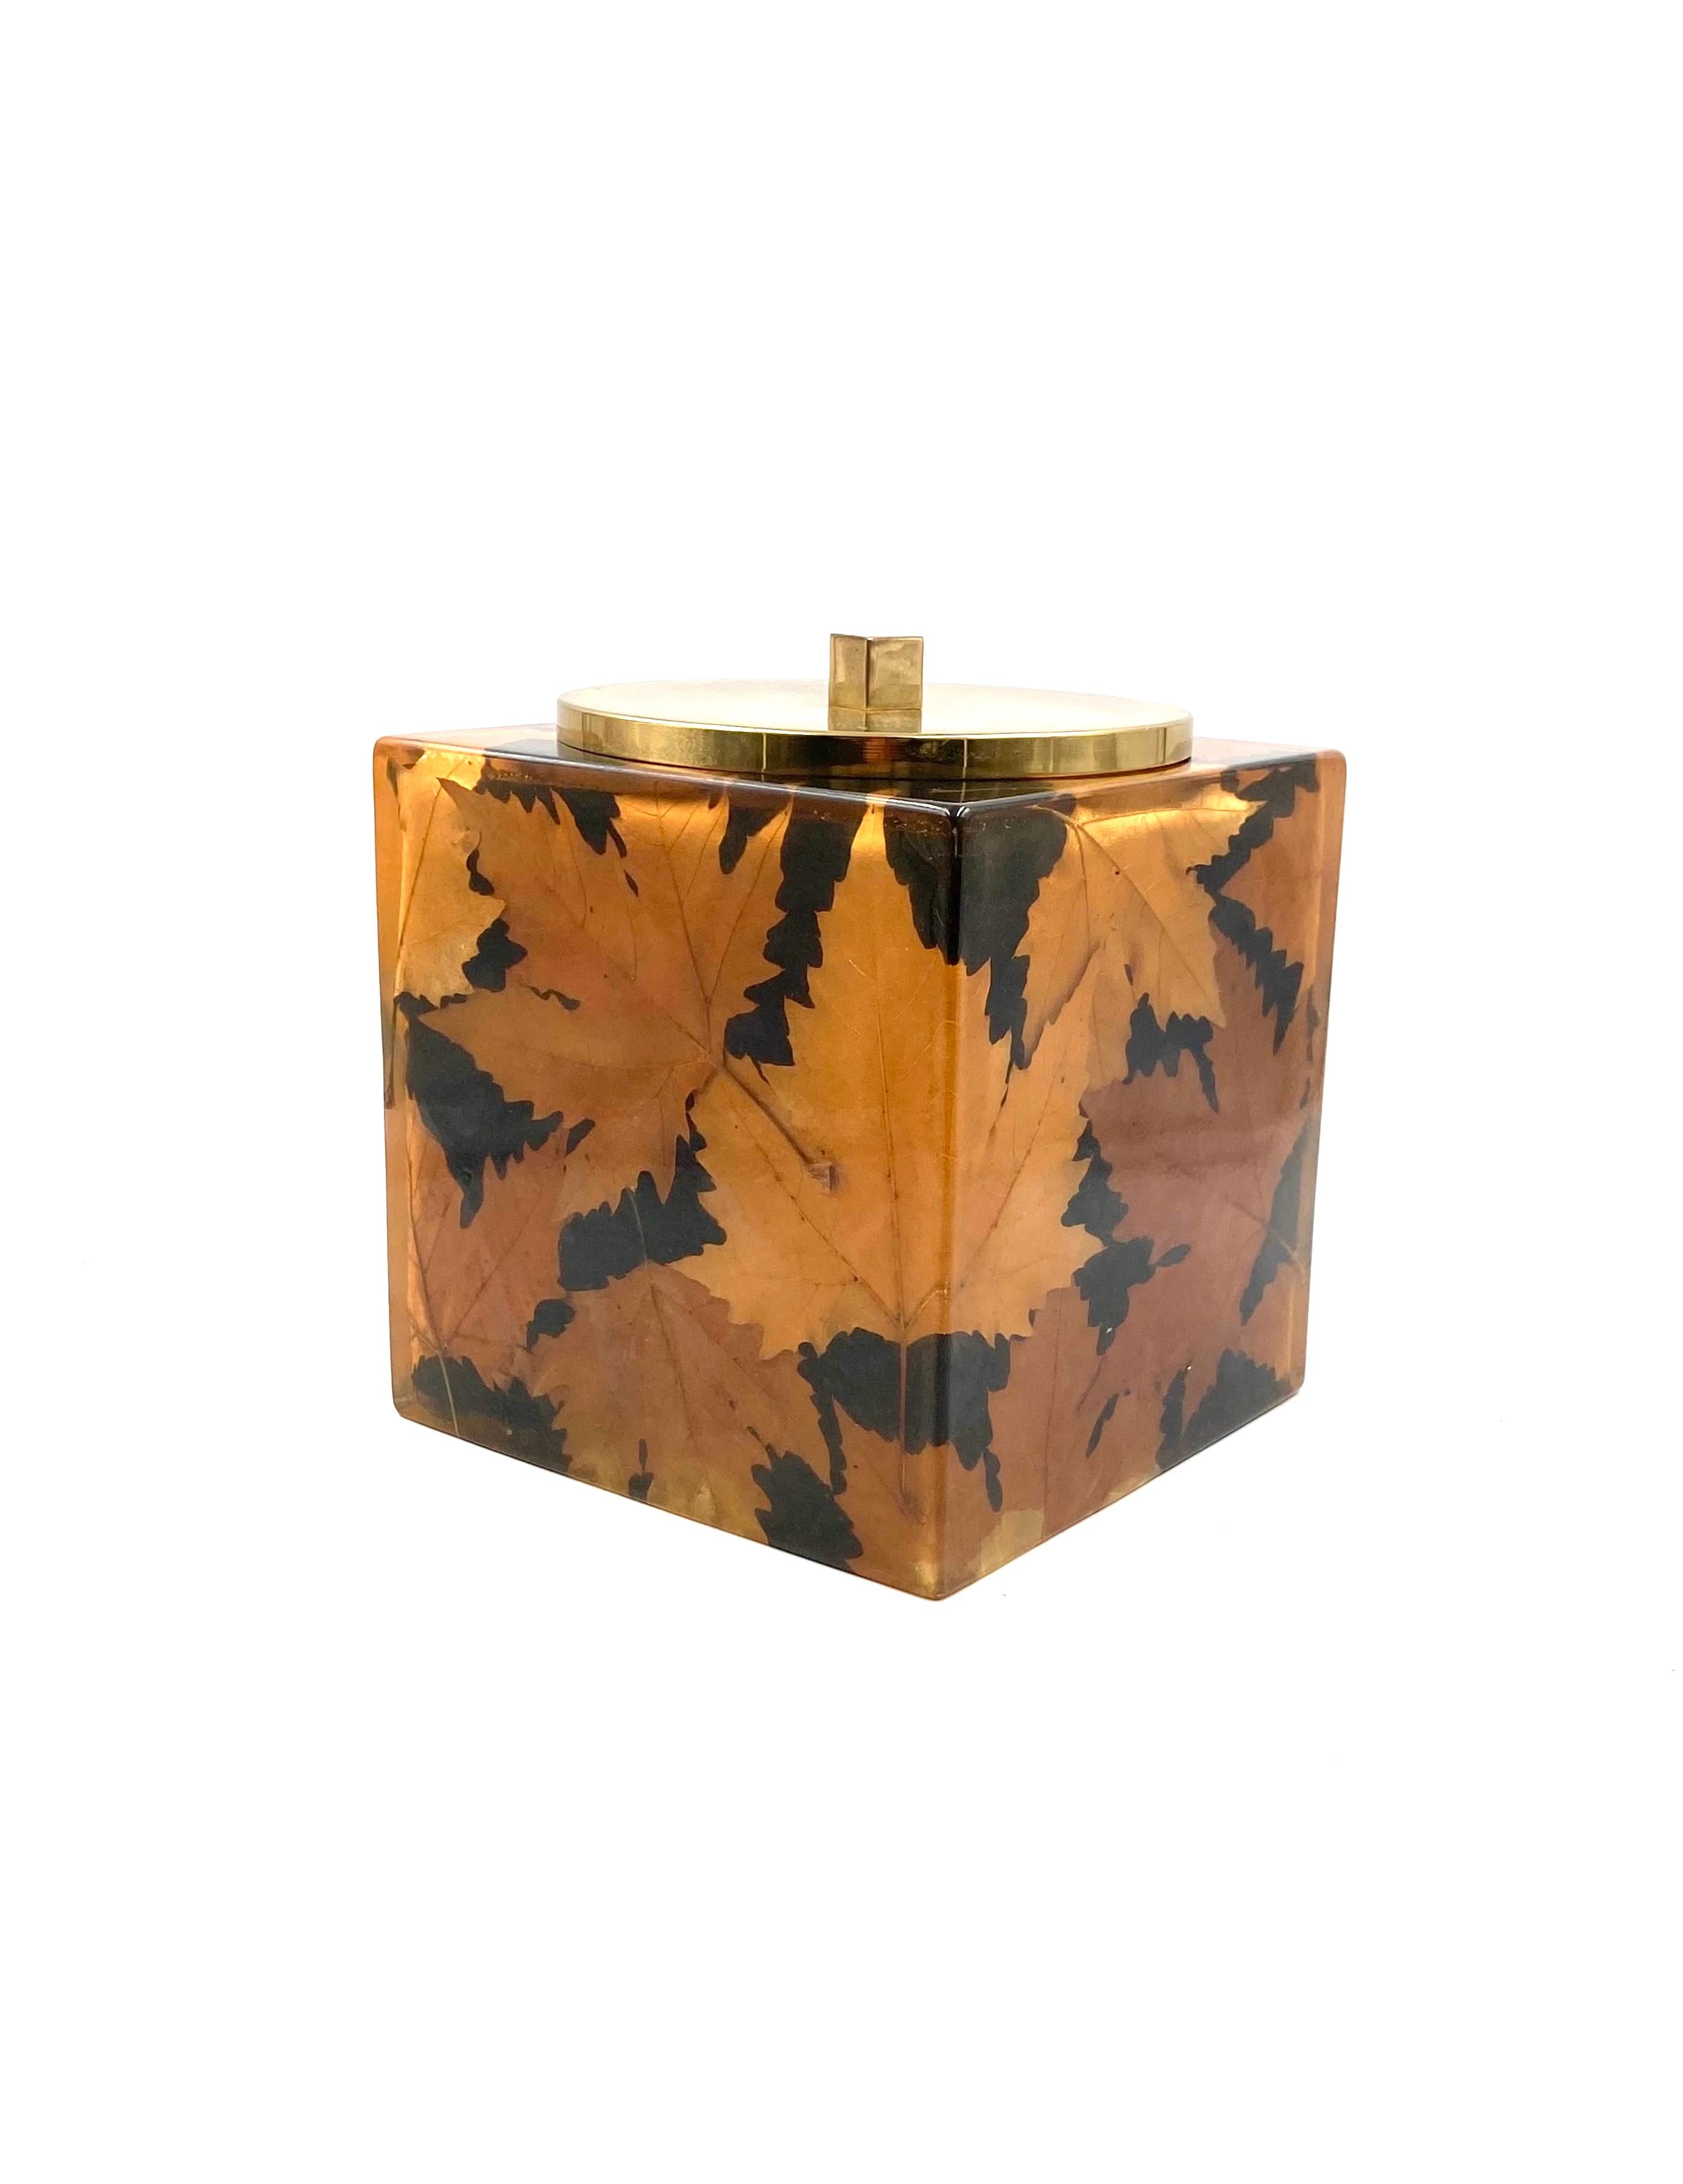 Hollywood regency brass and leaves resin ice bucket, Montagnani Florence 1970s For Sale 8